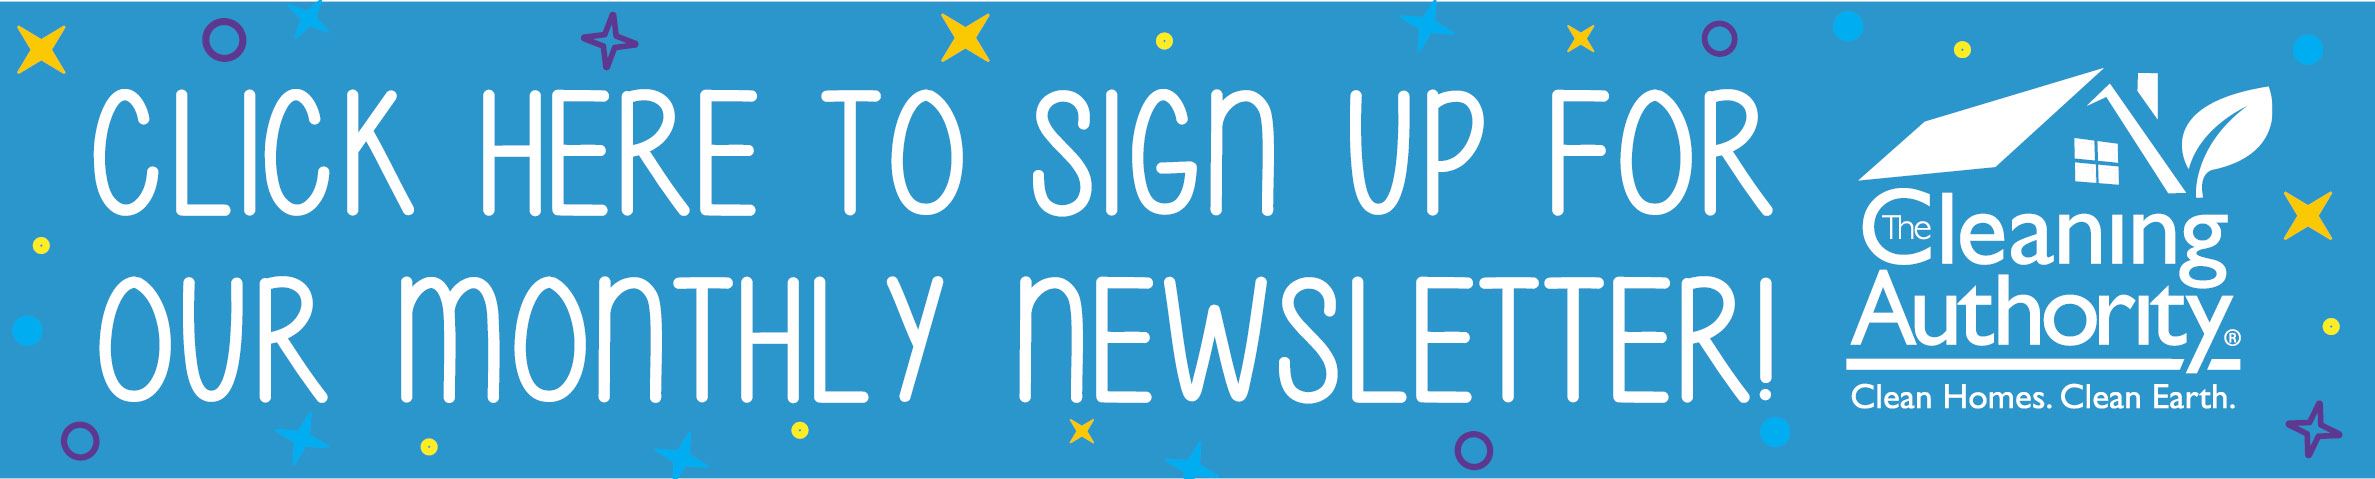 Sign up for the monthly newsletter